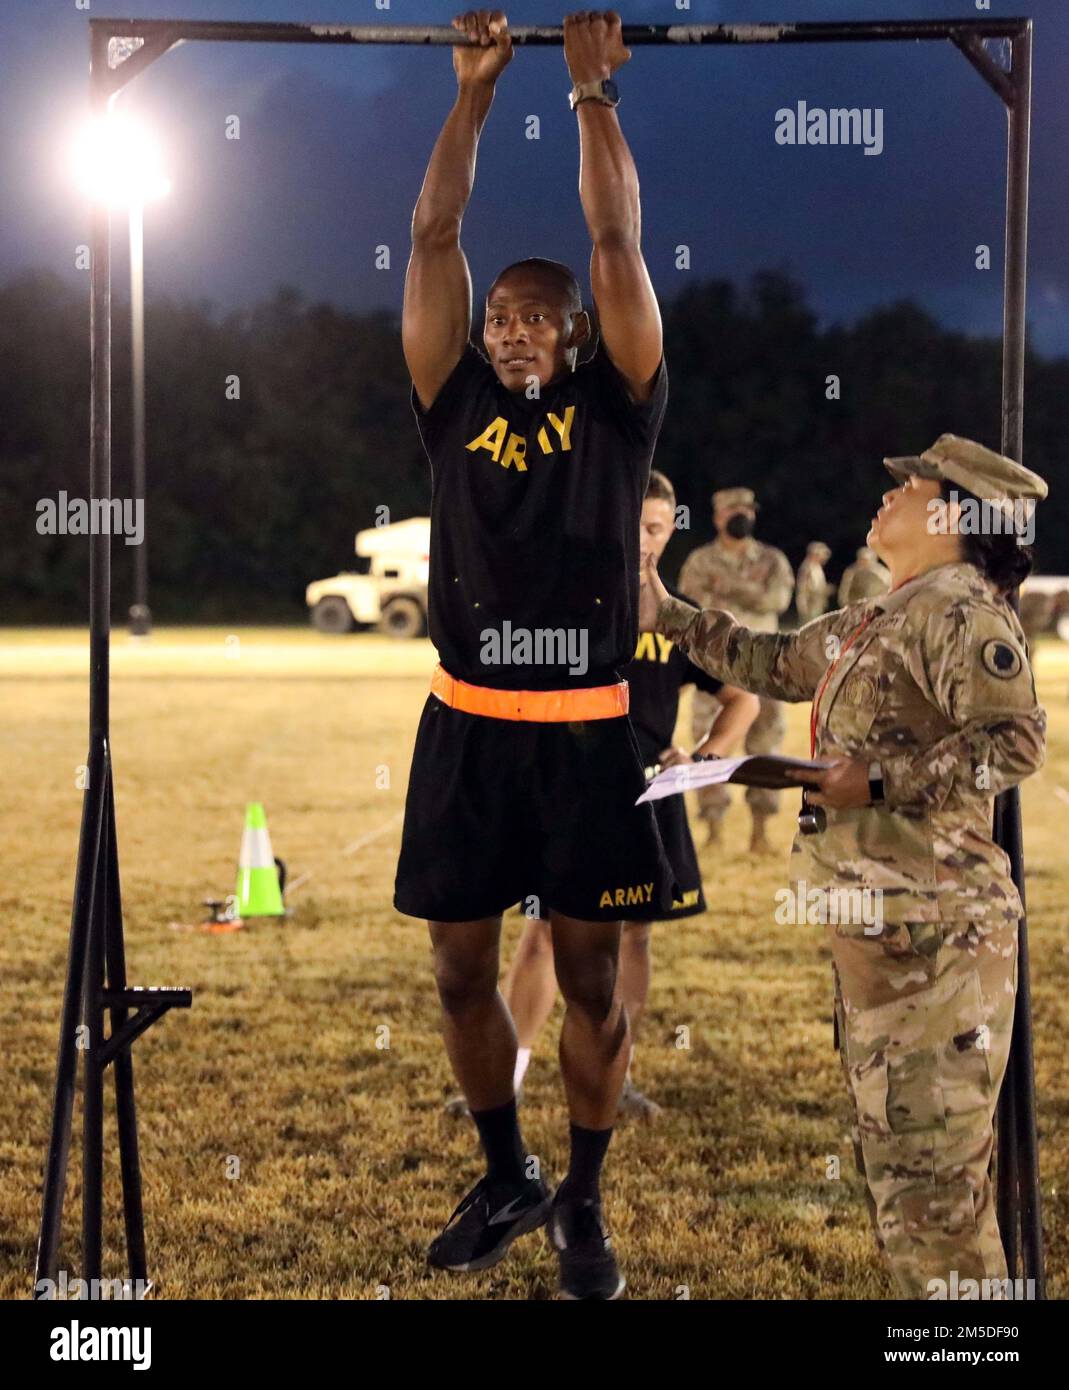 Hawaii Army National Guard (HIARNG) Soldier Spc. Kevin T. Brown, a mass communications specialist assigned to the 117th Mobile Public Affairs Detachment (MPAD), 103rd Troop Command, performs the leg tuck (LTK) event during the annual Best Warrior Competition (BWC) Army Combat Fitness Test (ACFT) event at the Regional Training Institute (RTI), Waimanalo, Hawaii, March 4, 2022. The LTK measures upper and lower body explosive power, flexibility and dynamic balance assisting with tasks like a buddy drag, throwing a hand grenade and employing progressive levels of force in man-to-man contact. Stock Photo